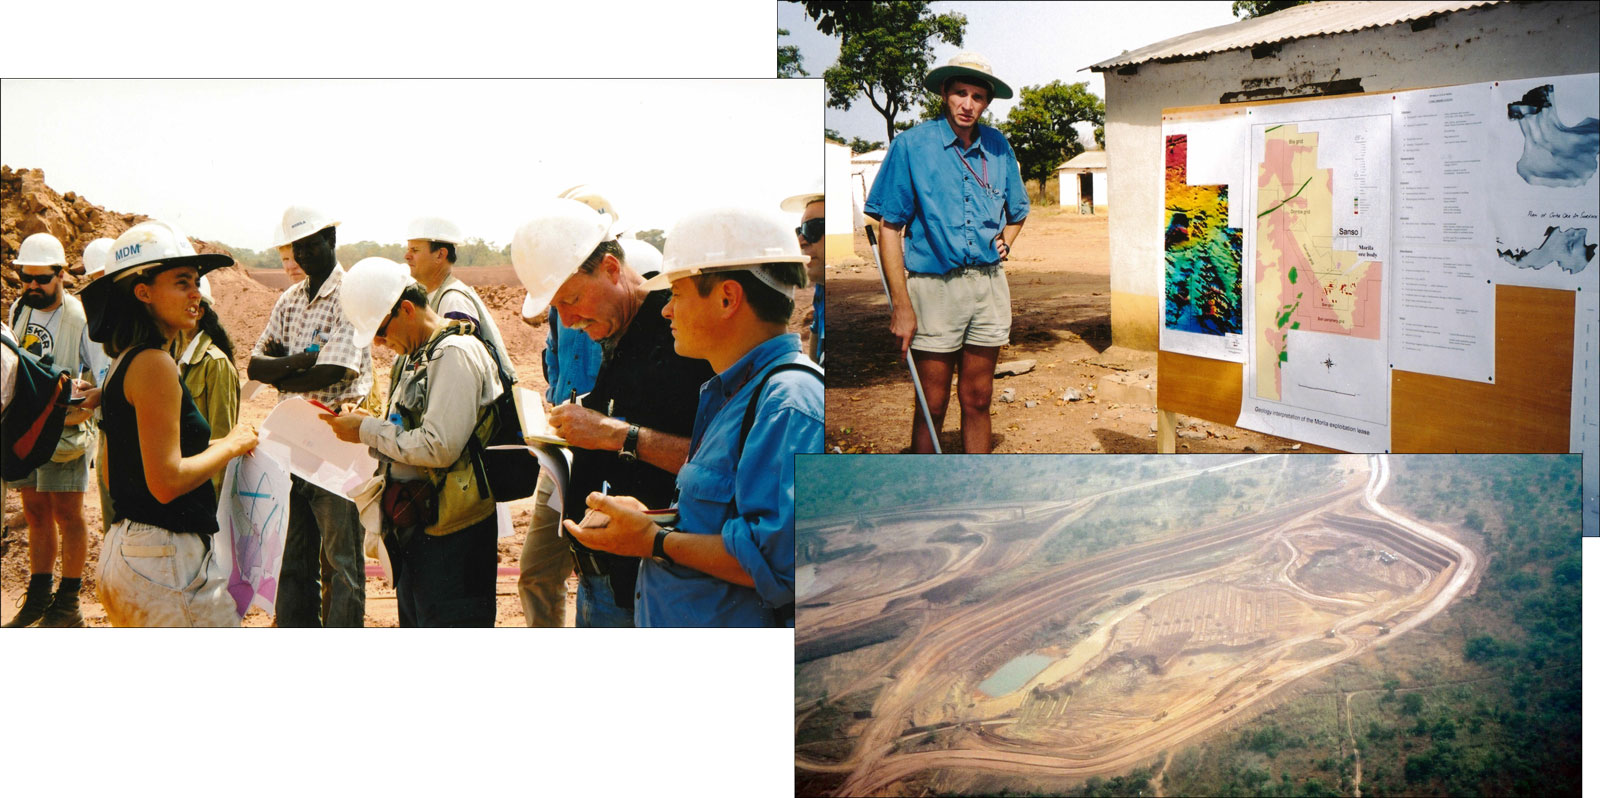 [Garrick Mullin of Anglogold thoroughly briefs the group on the geology and mineralisation at Morila, Mali with images and maps.]